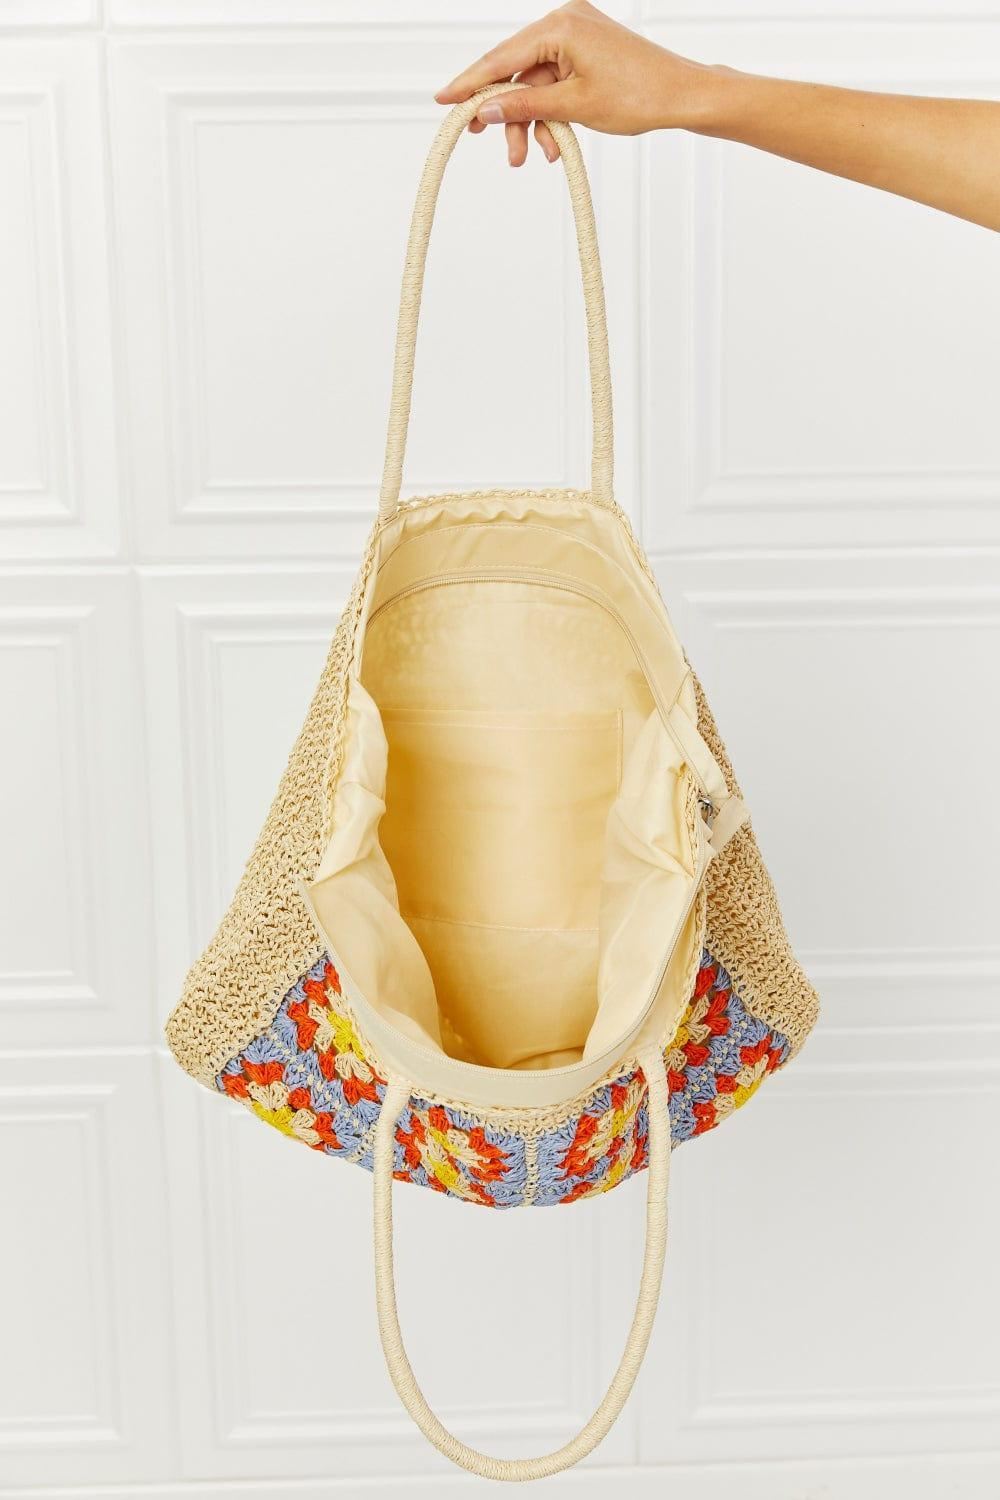 Off The Coast Straw Tote - Inspired Eye Boutique